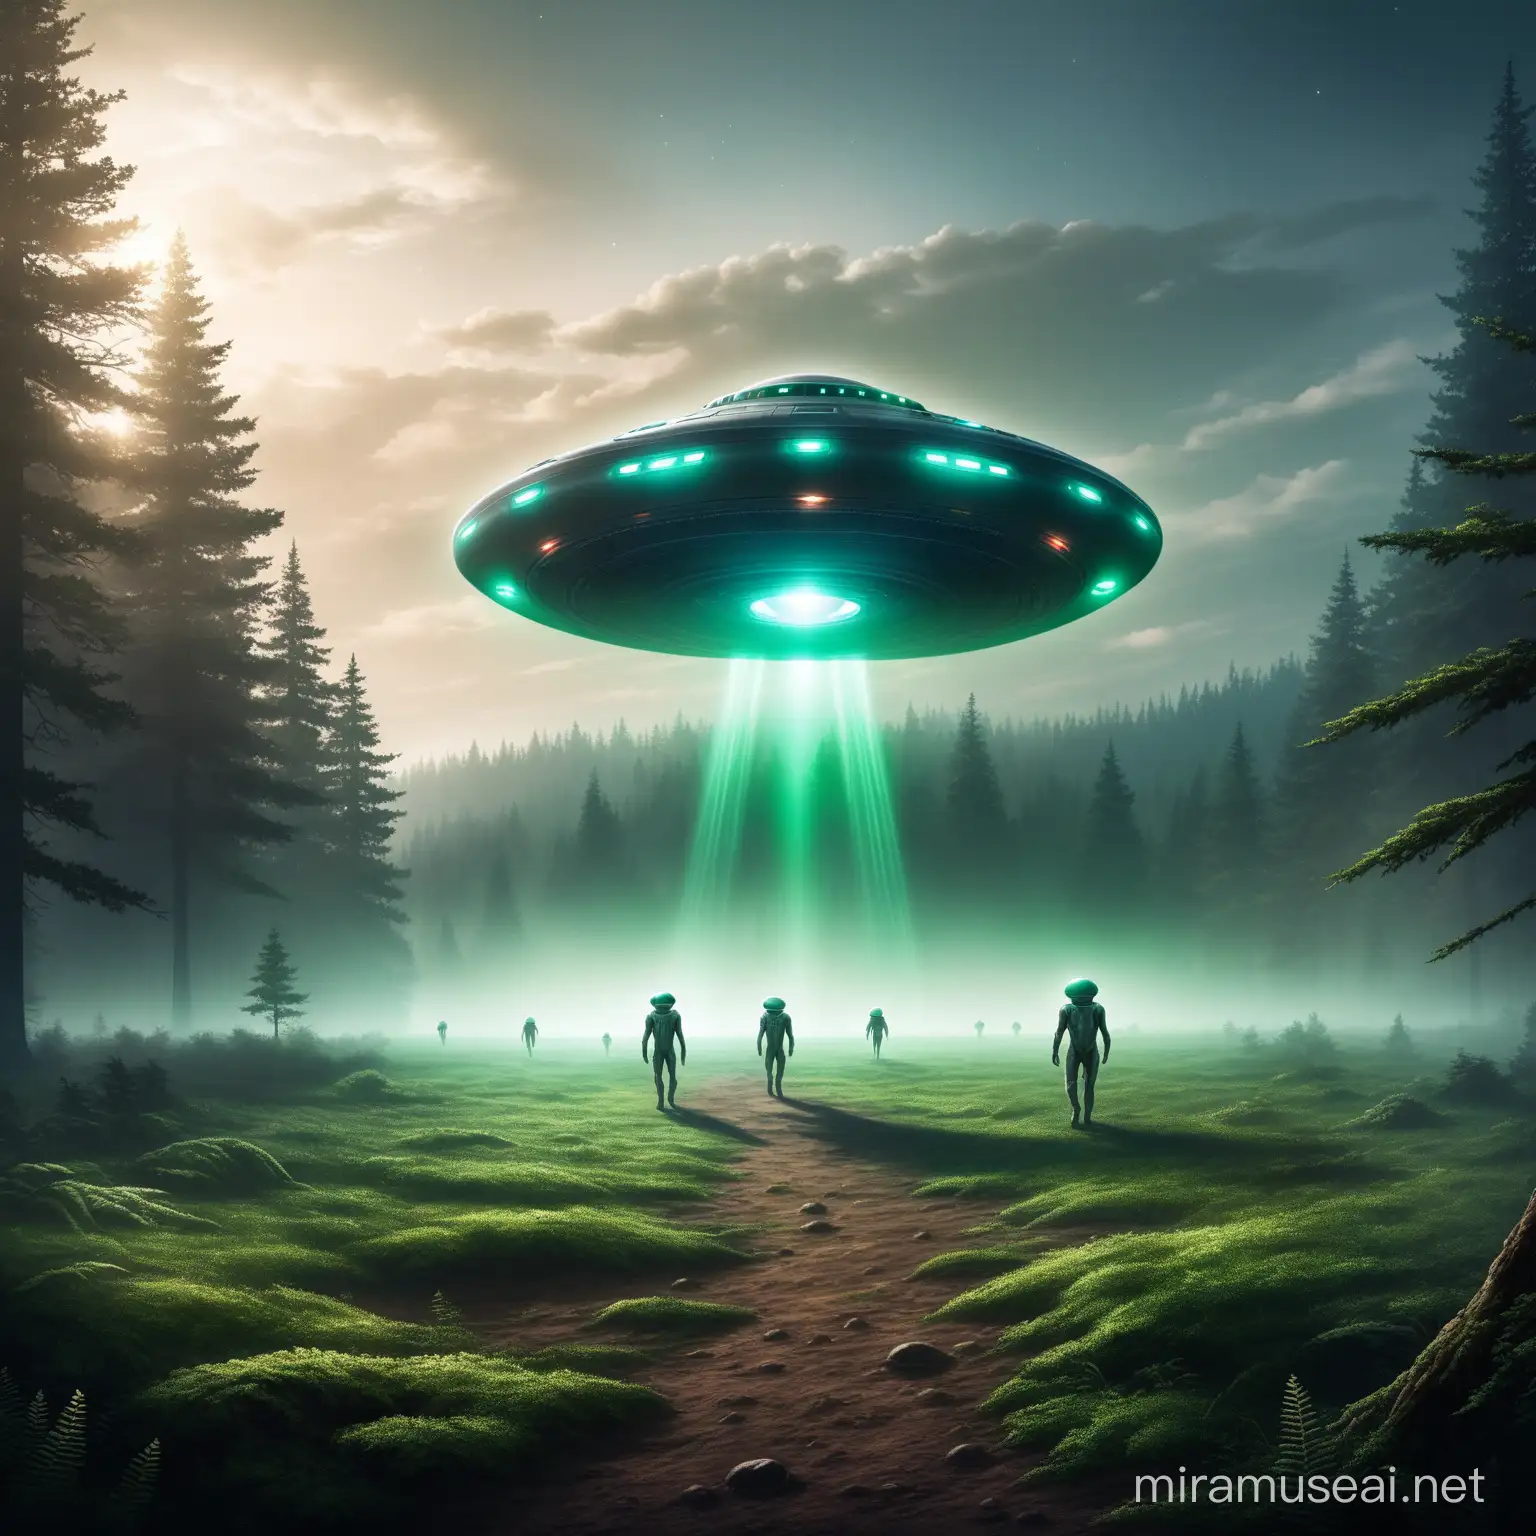 Aliens Explore UFO Landing Site in Forest Clearing